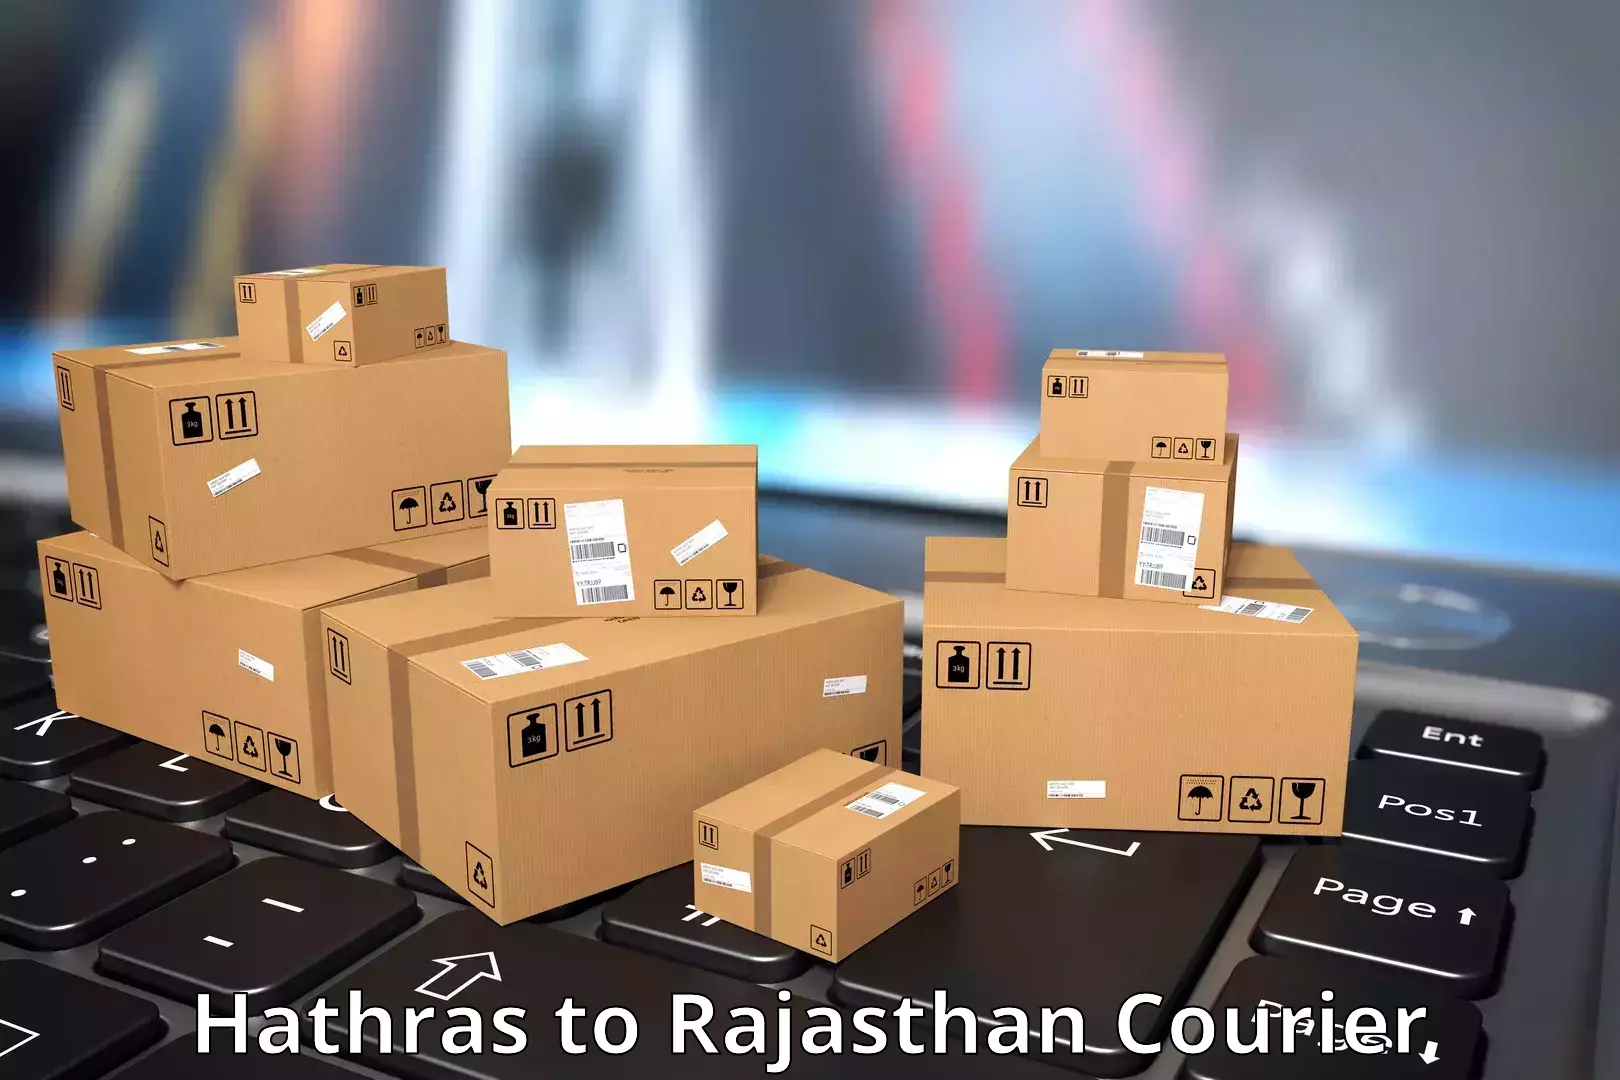 Reliable courier service Hathras to Bhawani Mandi